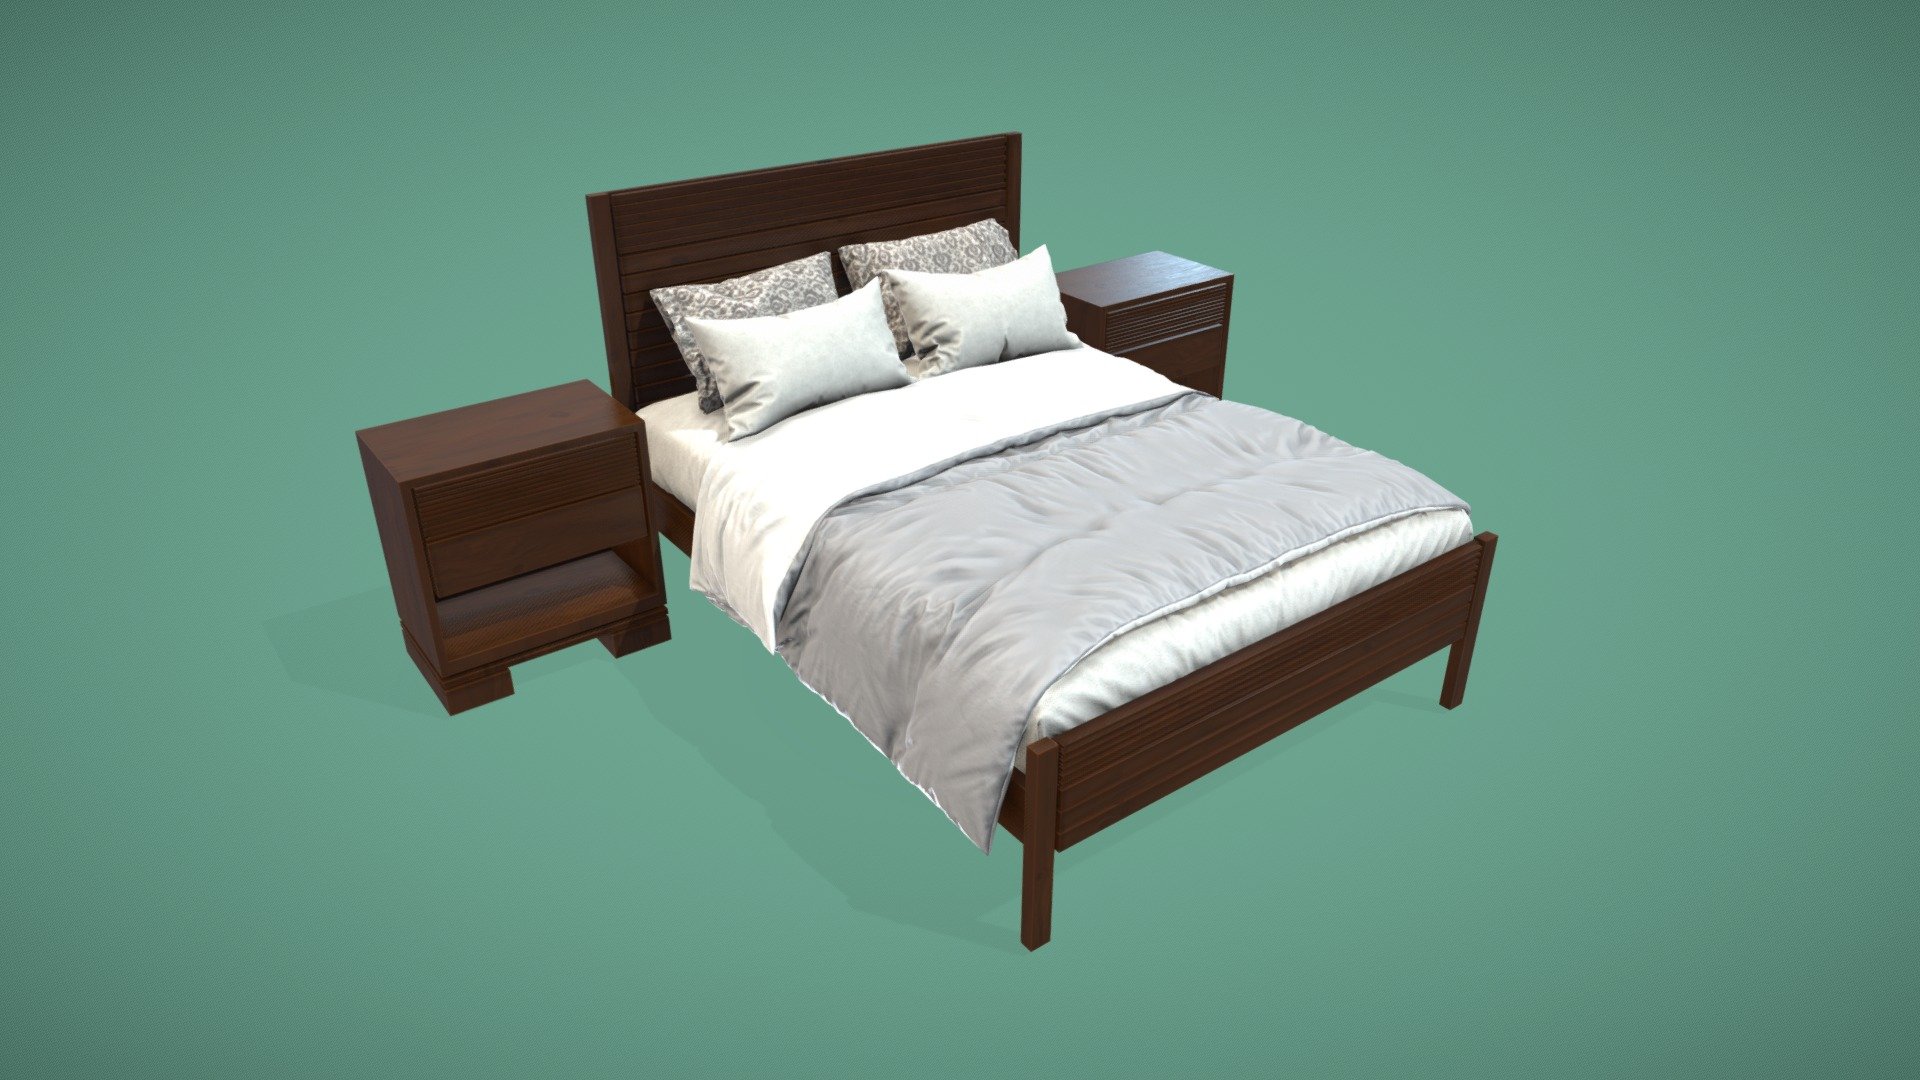 This is a 3D model of a Bed with Nightstands




Made in Blender 3.x (PBR Materials) and Rendering Cycles.

Main rendering made in Blender 3.x + Cycles using some HDR Environment Textures Images for lighting which is NOT provided in the package!

What does this package include?




3D Modeling of a Bed with Nightstands

4K Textures (Base Color, Normal Map, Metallic ,Roughness, Ambient Occlusion)

Important notes




File format included - (Blend, FBX, OBJ, GLB, STL)

Texture size - 4K

Uvs non - overlapping

Polygon: Quads

Centered at 0,0,0

In some formats may be needed to reassign textures and add HDR Environment Textures Images for lighting.

Not lights include

No special plugin needed to open the scene.

If you like my work, please leave your comment and like, it helps me a lot to create new content. If you have any questions or changes about colors or another thing, you can contact me at we3domodel@gmail.com - Bed with Nightstands Low Poly - Buy Royalty Free 3D model by We3Do (@we3DoModel) 3d model